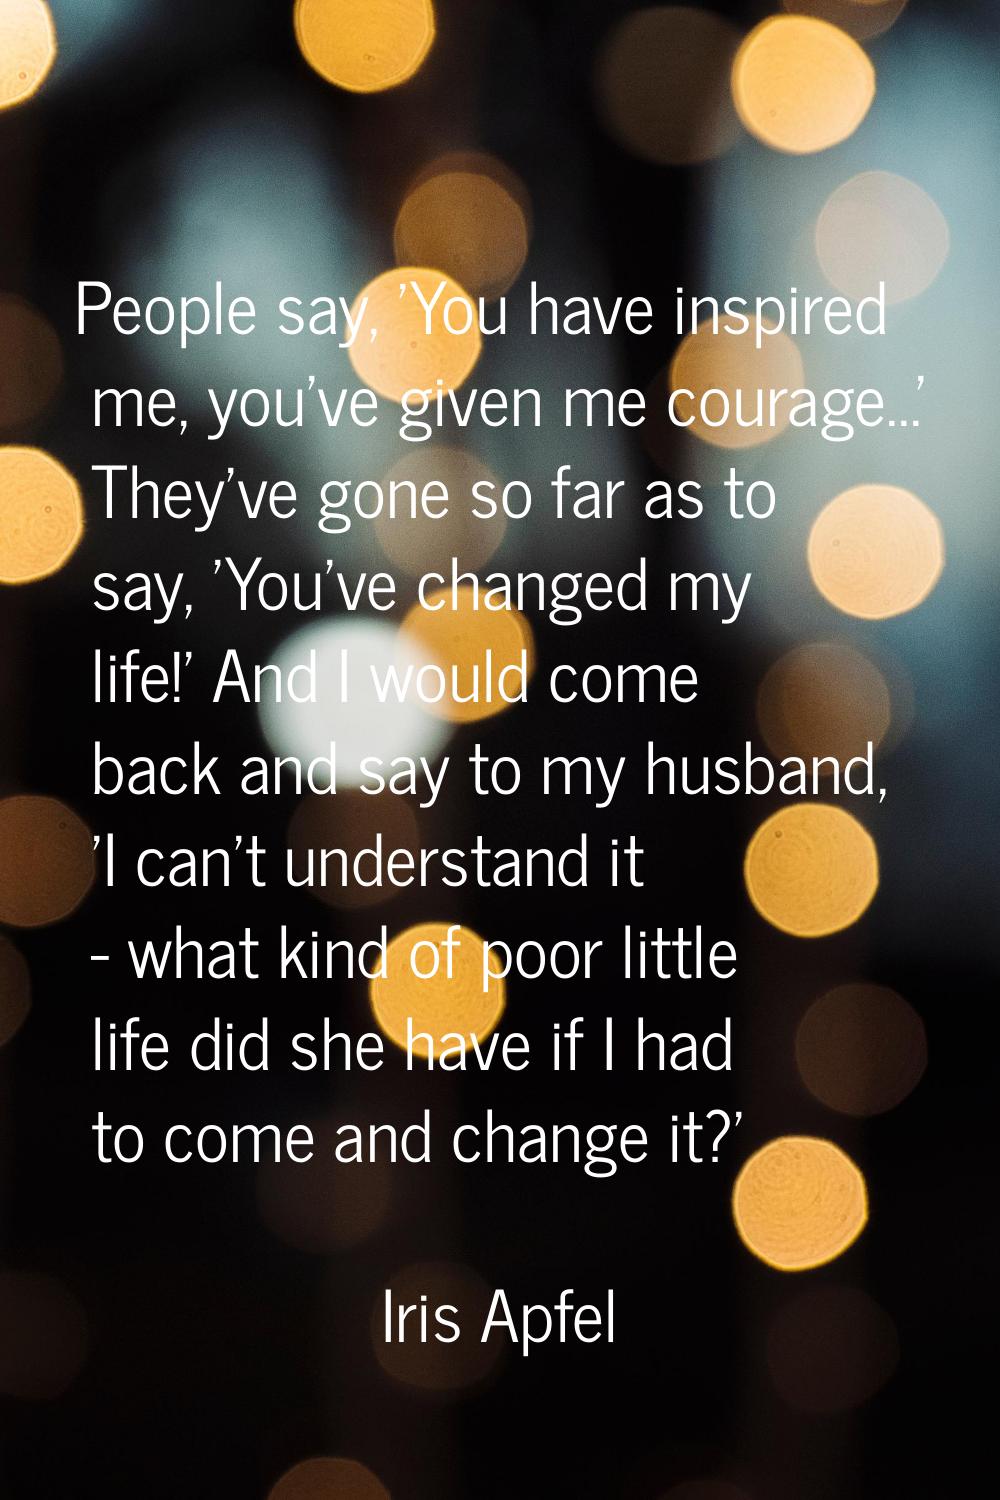 People say, 'You have inspired me, you've given me courage...' They've gone so far as to say, 'You'